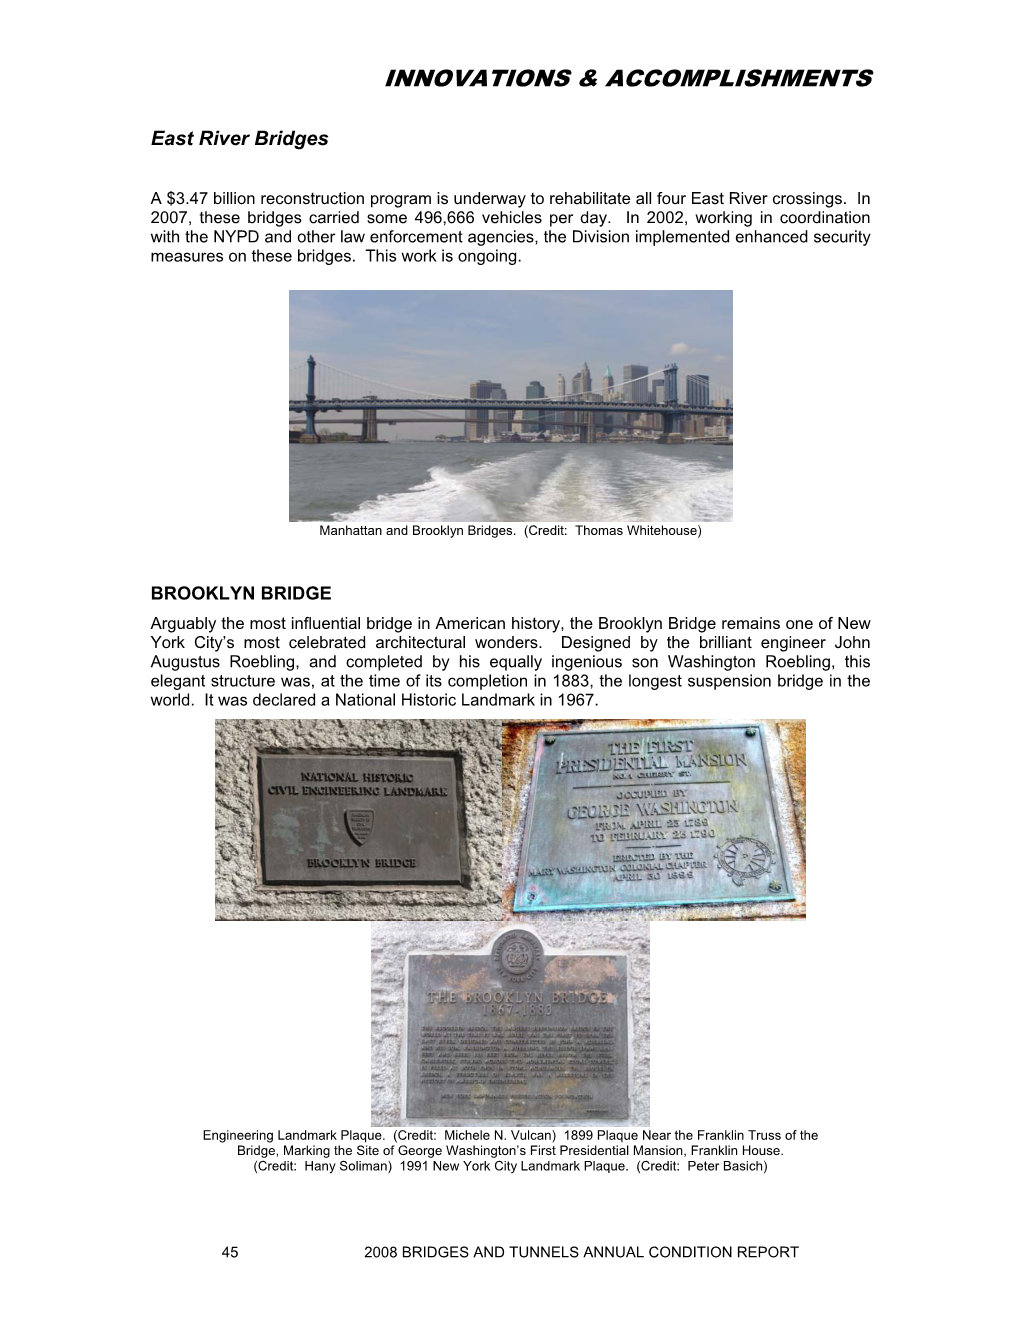 2008 Bridges and Tunnels Annual Condition Report Innovations & Accomplishments